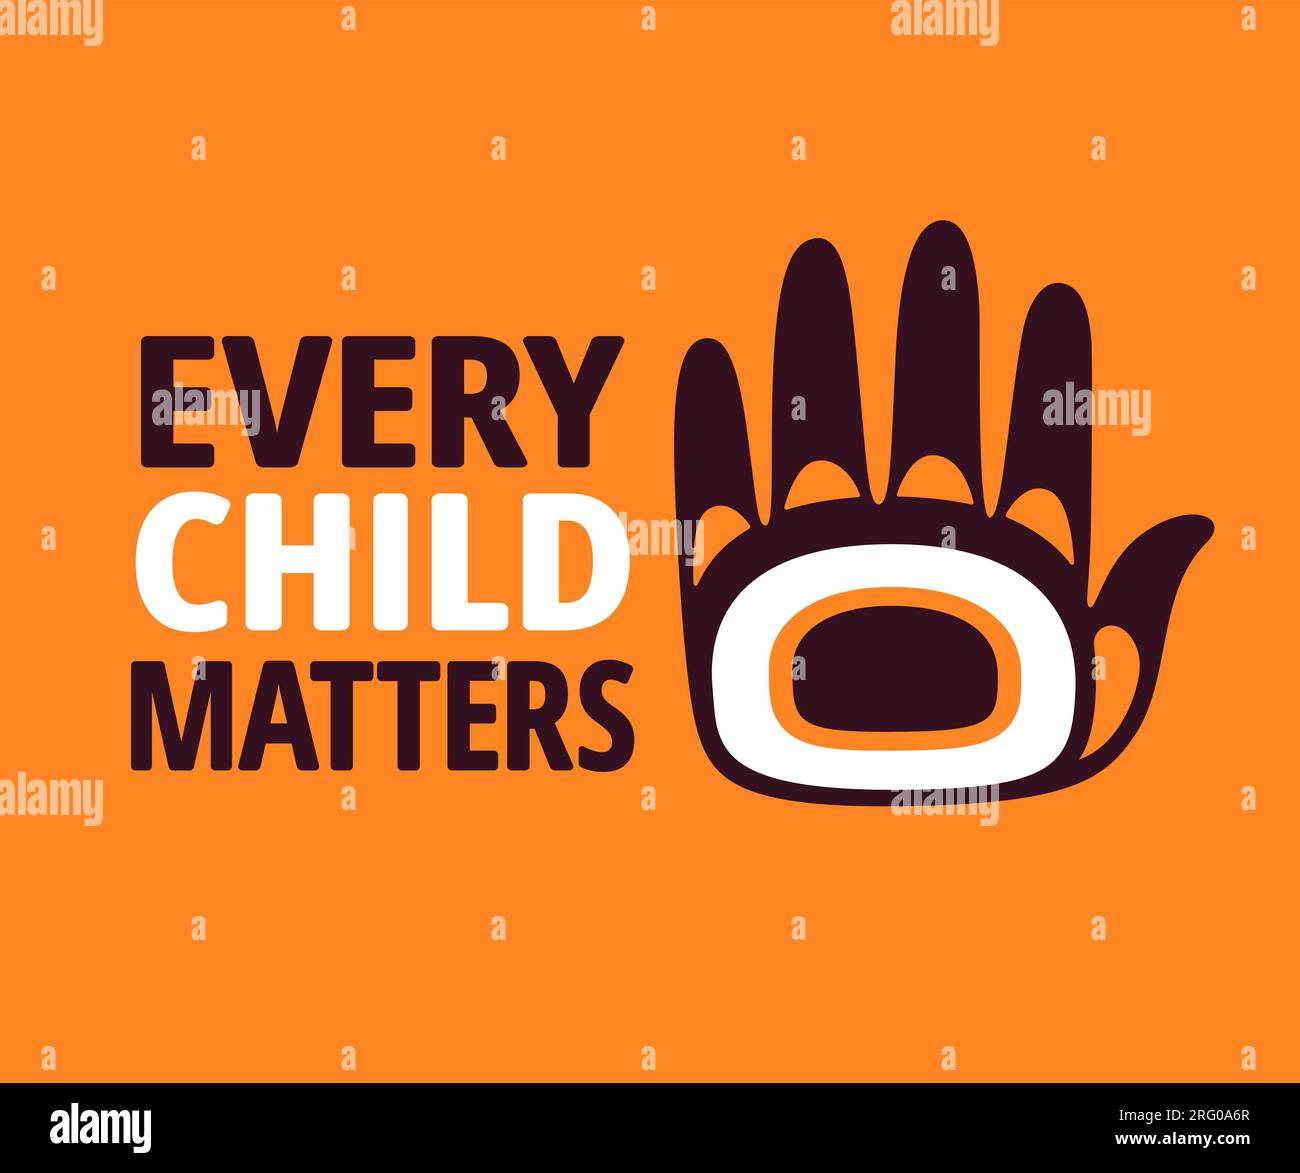 Every Child Matters, National Day for Truth and Reconciliation (Orange Shirt Day) in Canada. Text with hand print design. Vector banner illustration. Stock Vector